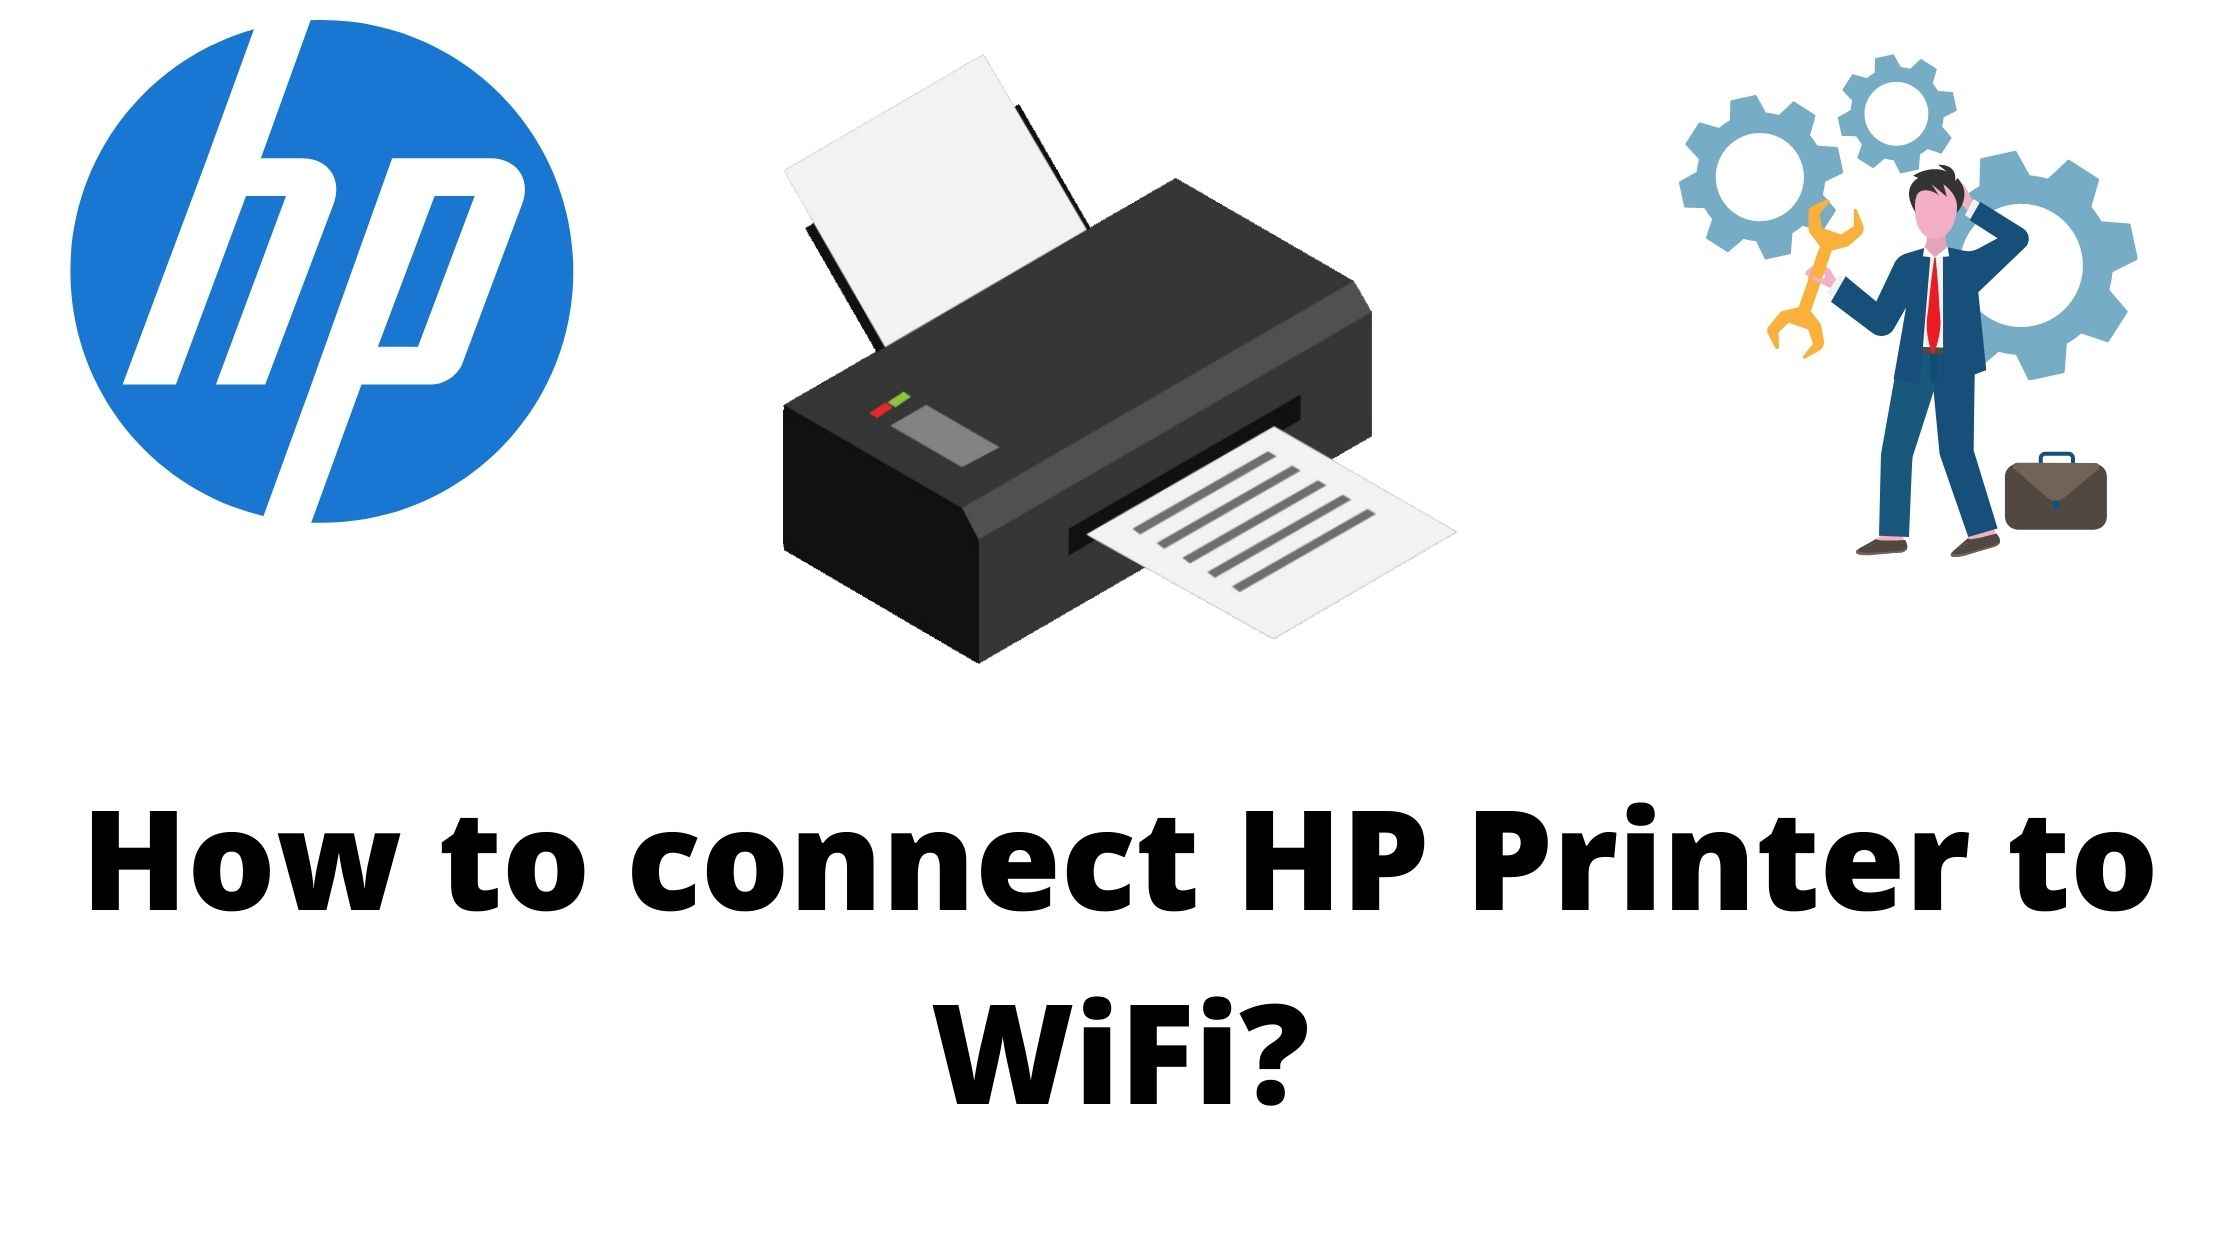 Connect HP Printer to WIFI